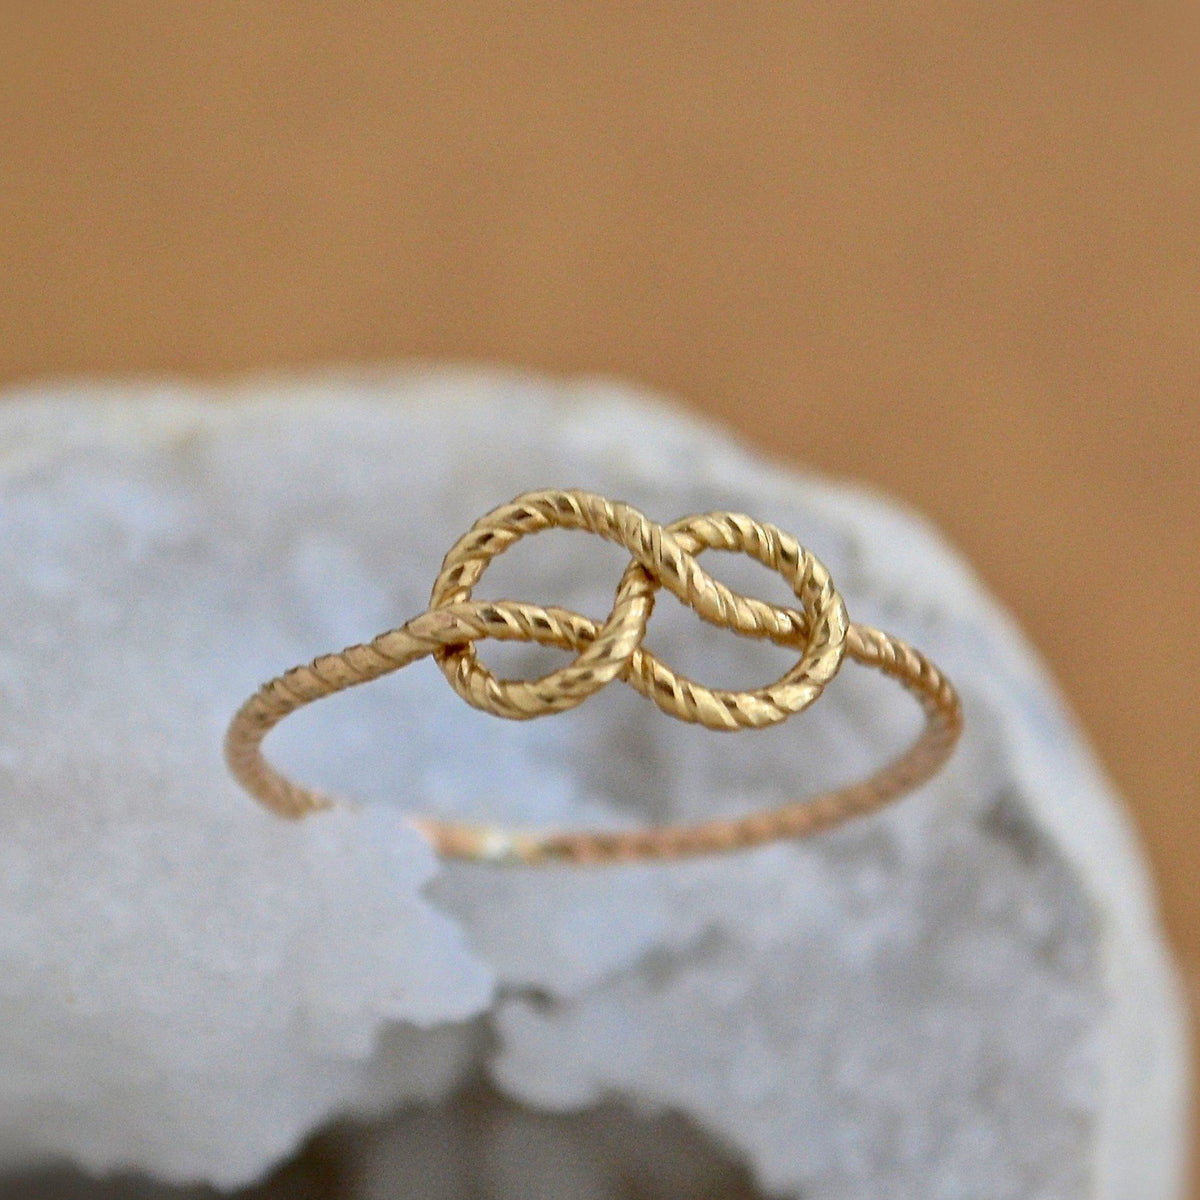 Sailor&#39;s Knot Ring - handmade nautical minimalist infinity rope knot ring - Foamy Wader